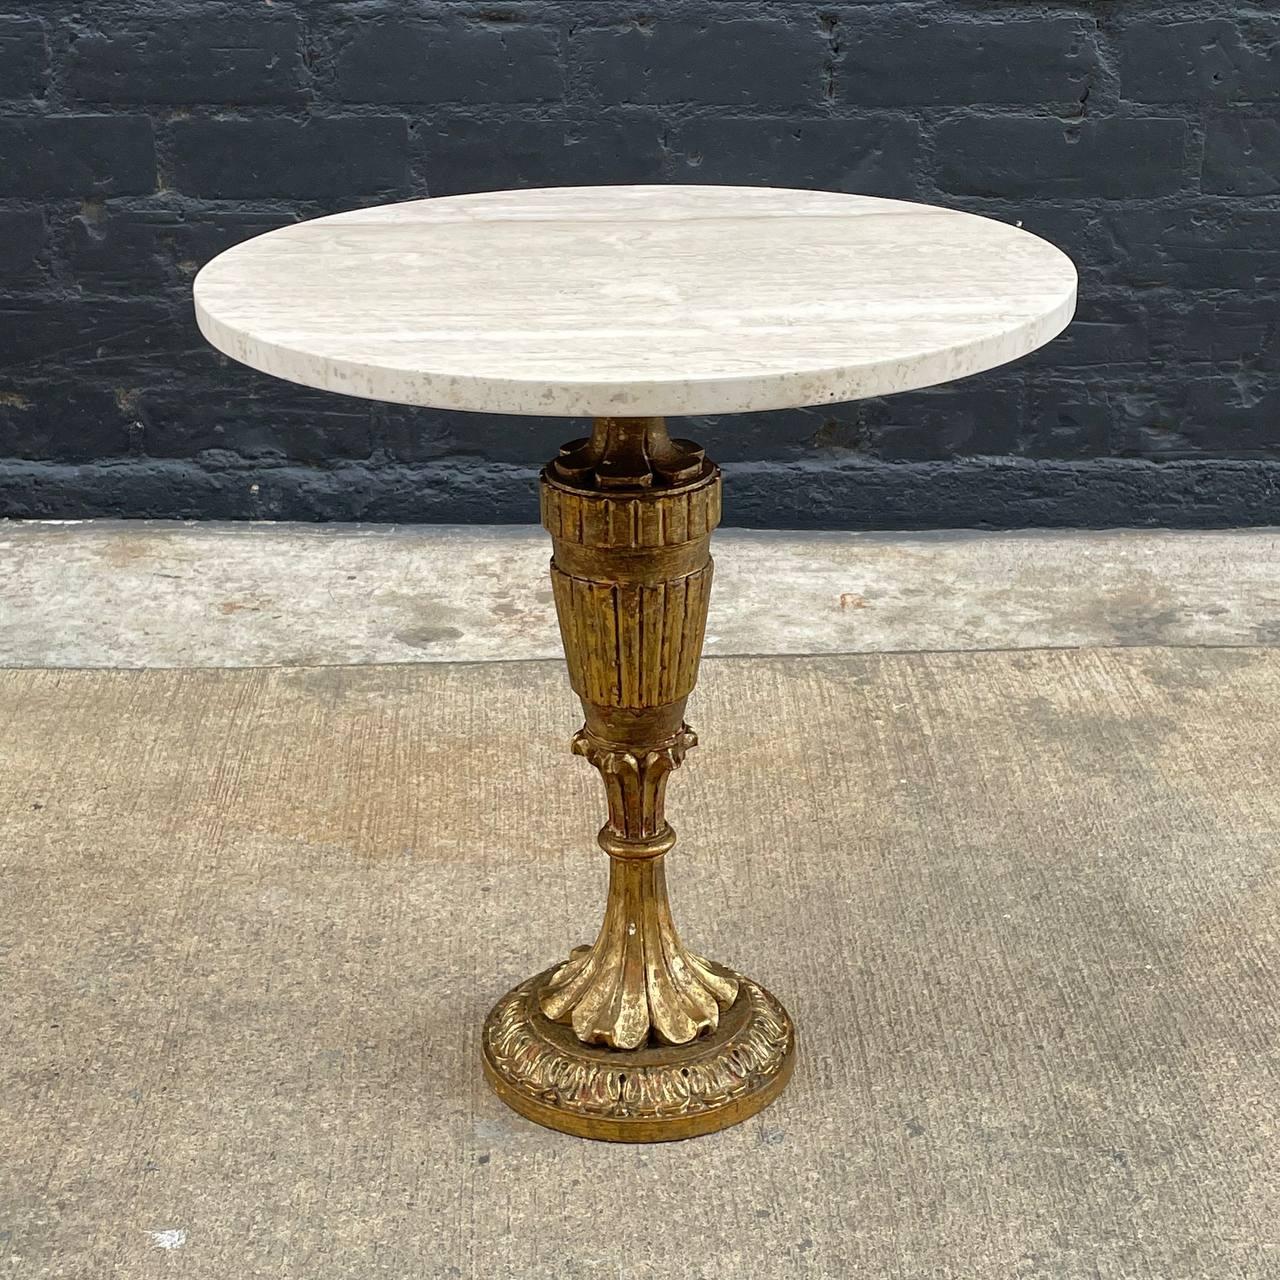 Italian Antique Gold Leaf Gilded Side Table with Travertine Top

Country: Italy 
Materials: Gold Leaf Gilded Wood
Style: Italian Antique
Year: 1920s

$1,895

Dimensions 
21.25”H x 20”W x 20”D.